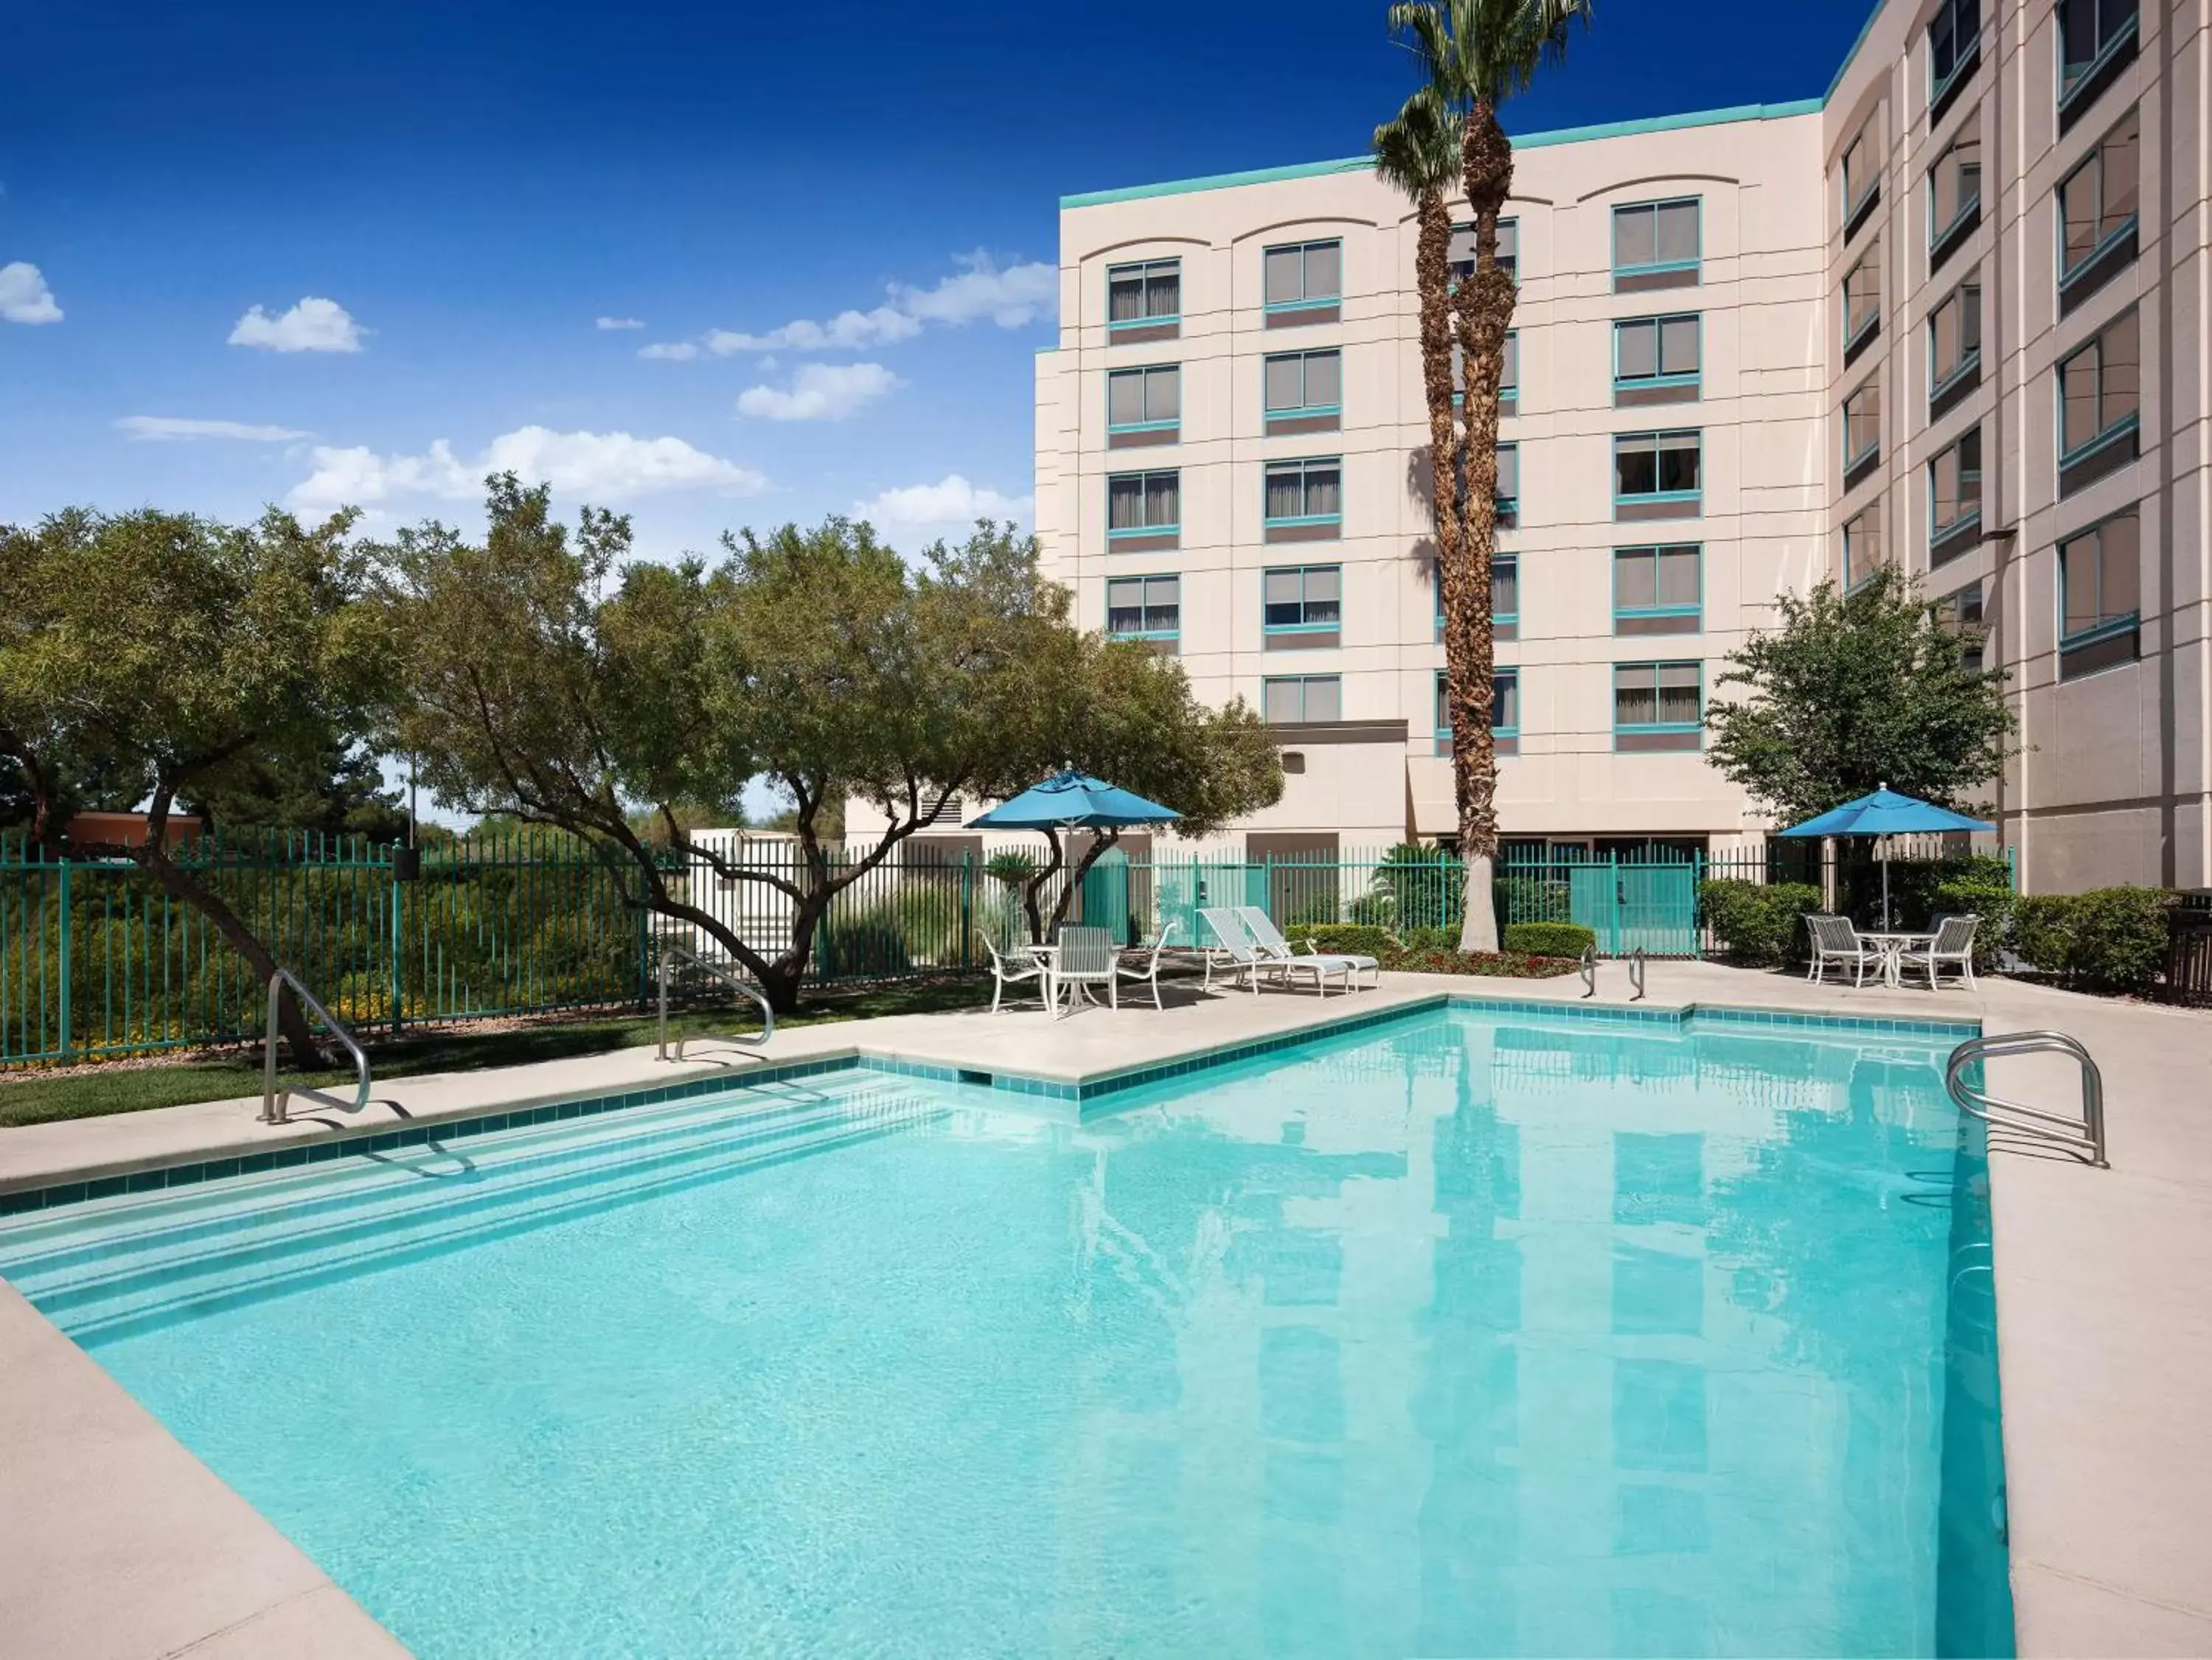 Pool view, Property Building in DoubleTree by Hilton Las Vegas Airport